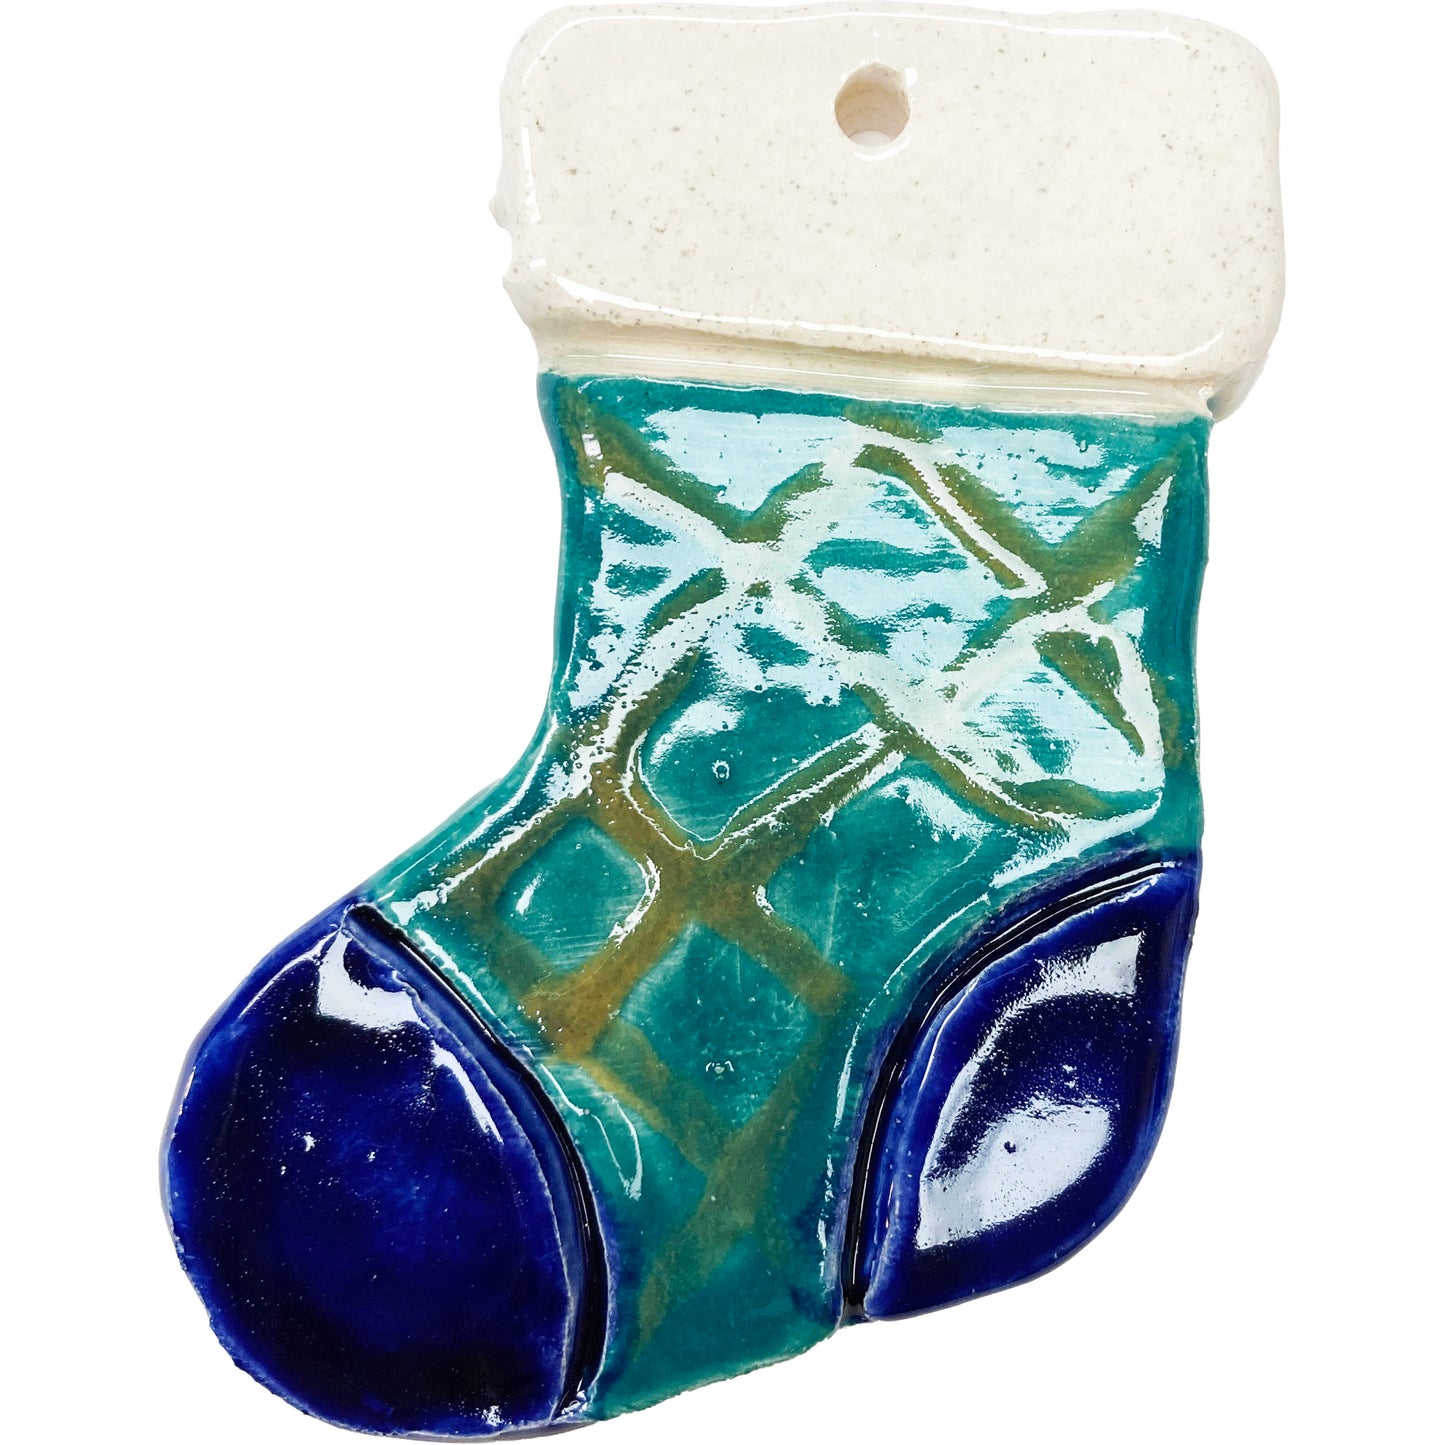 WATCH Resources Art Guild - Ceramic Arts Handmade Clay Crafts 4-inch x 3-inch Glazed Christmas Stocking made by Lisa Uptain